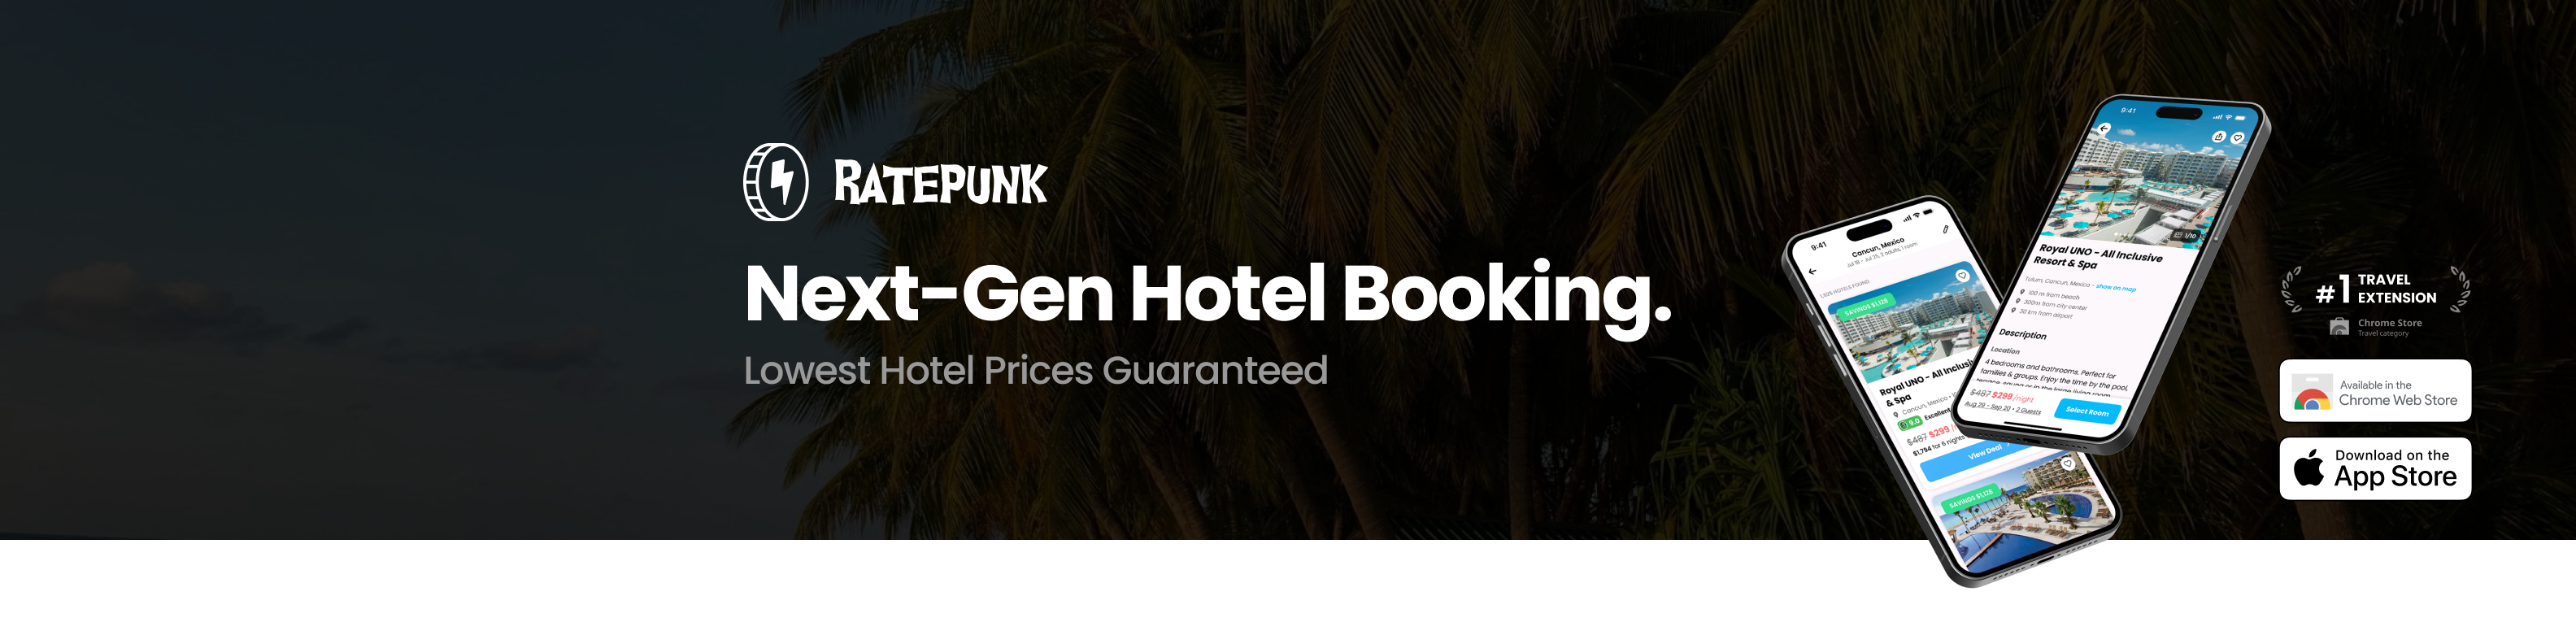 Ratepunk - browser extension & iOs app - next-gen hotel booking plattform that saves money for travelers - lowest hotel prices guaranteed. 